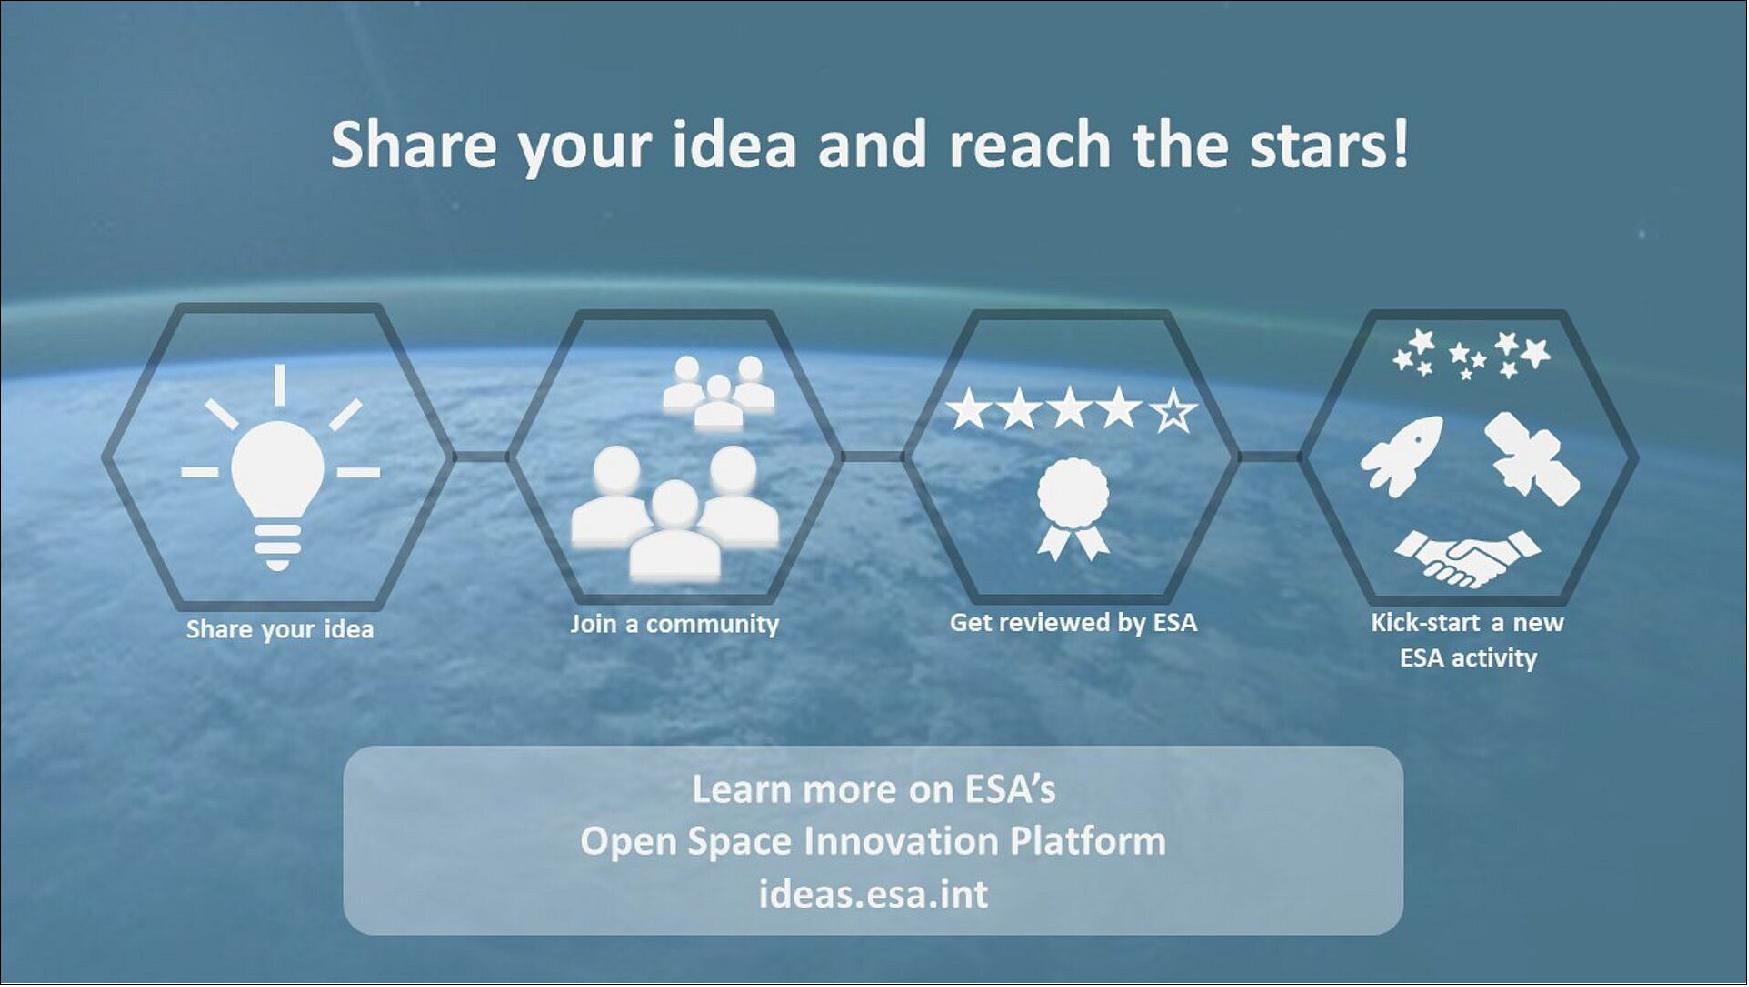 Figure 35: ESA's Open Space Innovation Platform (OSIP) takes that form of a website that enables the submission of novel ideas for space technology and applications. Anybody is welcome to submit ideas through OSIP. The platform supports individuals who wish to contribute to European space research and interact with space industry experts. It also encourages ideas from legal entities interested in interacting with ESA and gaining funding or support for new research activities. - OSIP allows ESA to discover novel ideas and invest in new unconventional activities to foster advancement in the space industry. As the central European space body, ESA is ideally-placed to coordinate such projects. - The platform links ESA with businesses, organizations and individuals across the world. Working together in such a way is vital for effectively advancing space research and technology, and will contribute to the European space industry being a leader in this field (image credit: ESA)